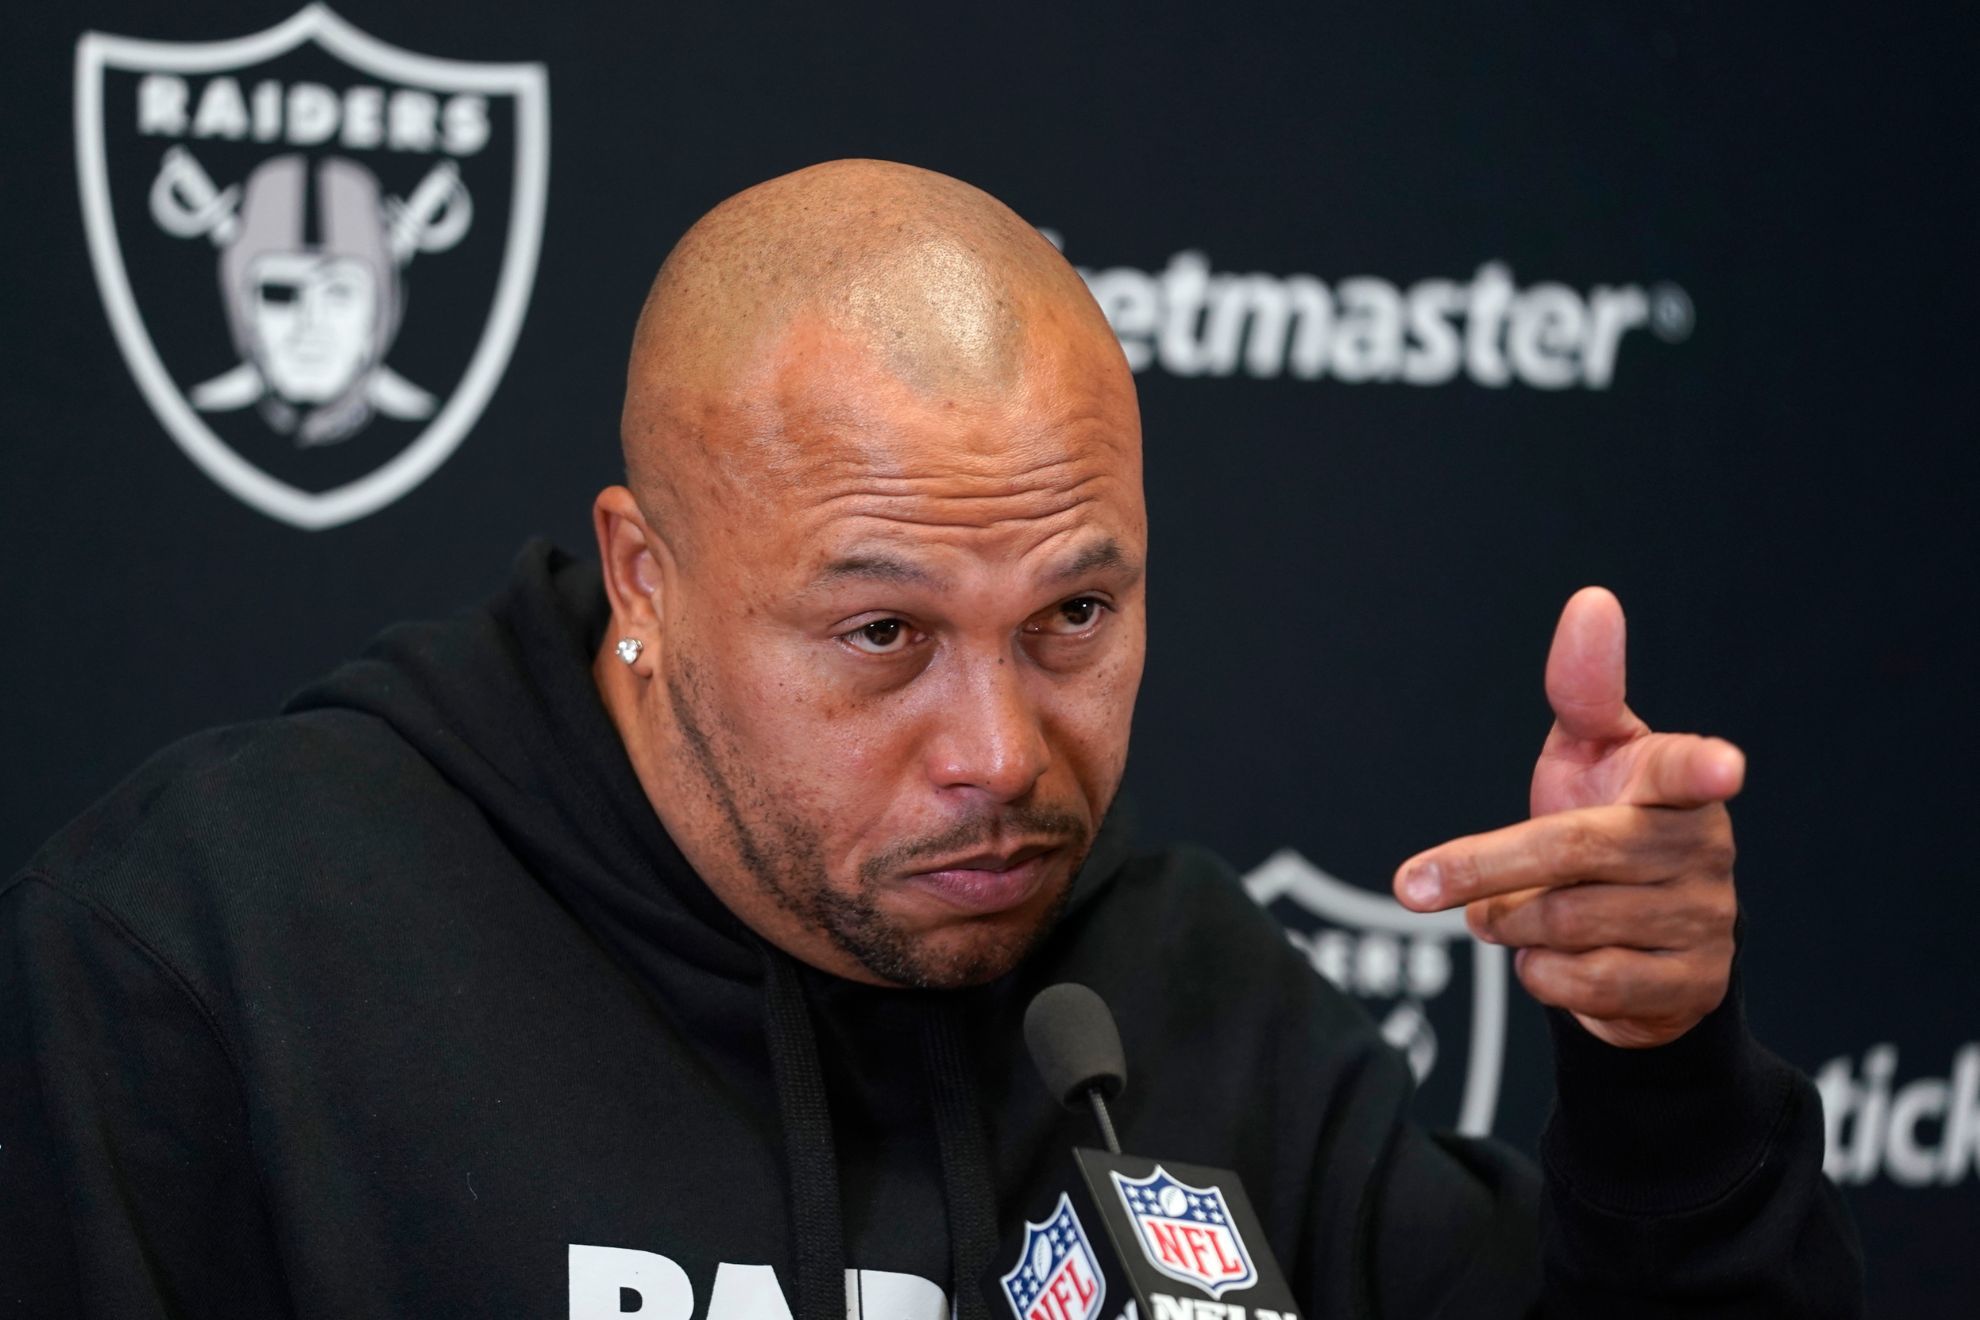 Antonio Pierce hates the Chiefs and is proud Raiders are last team to beat them